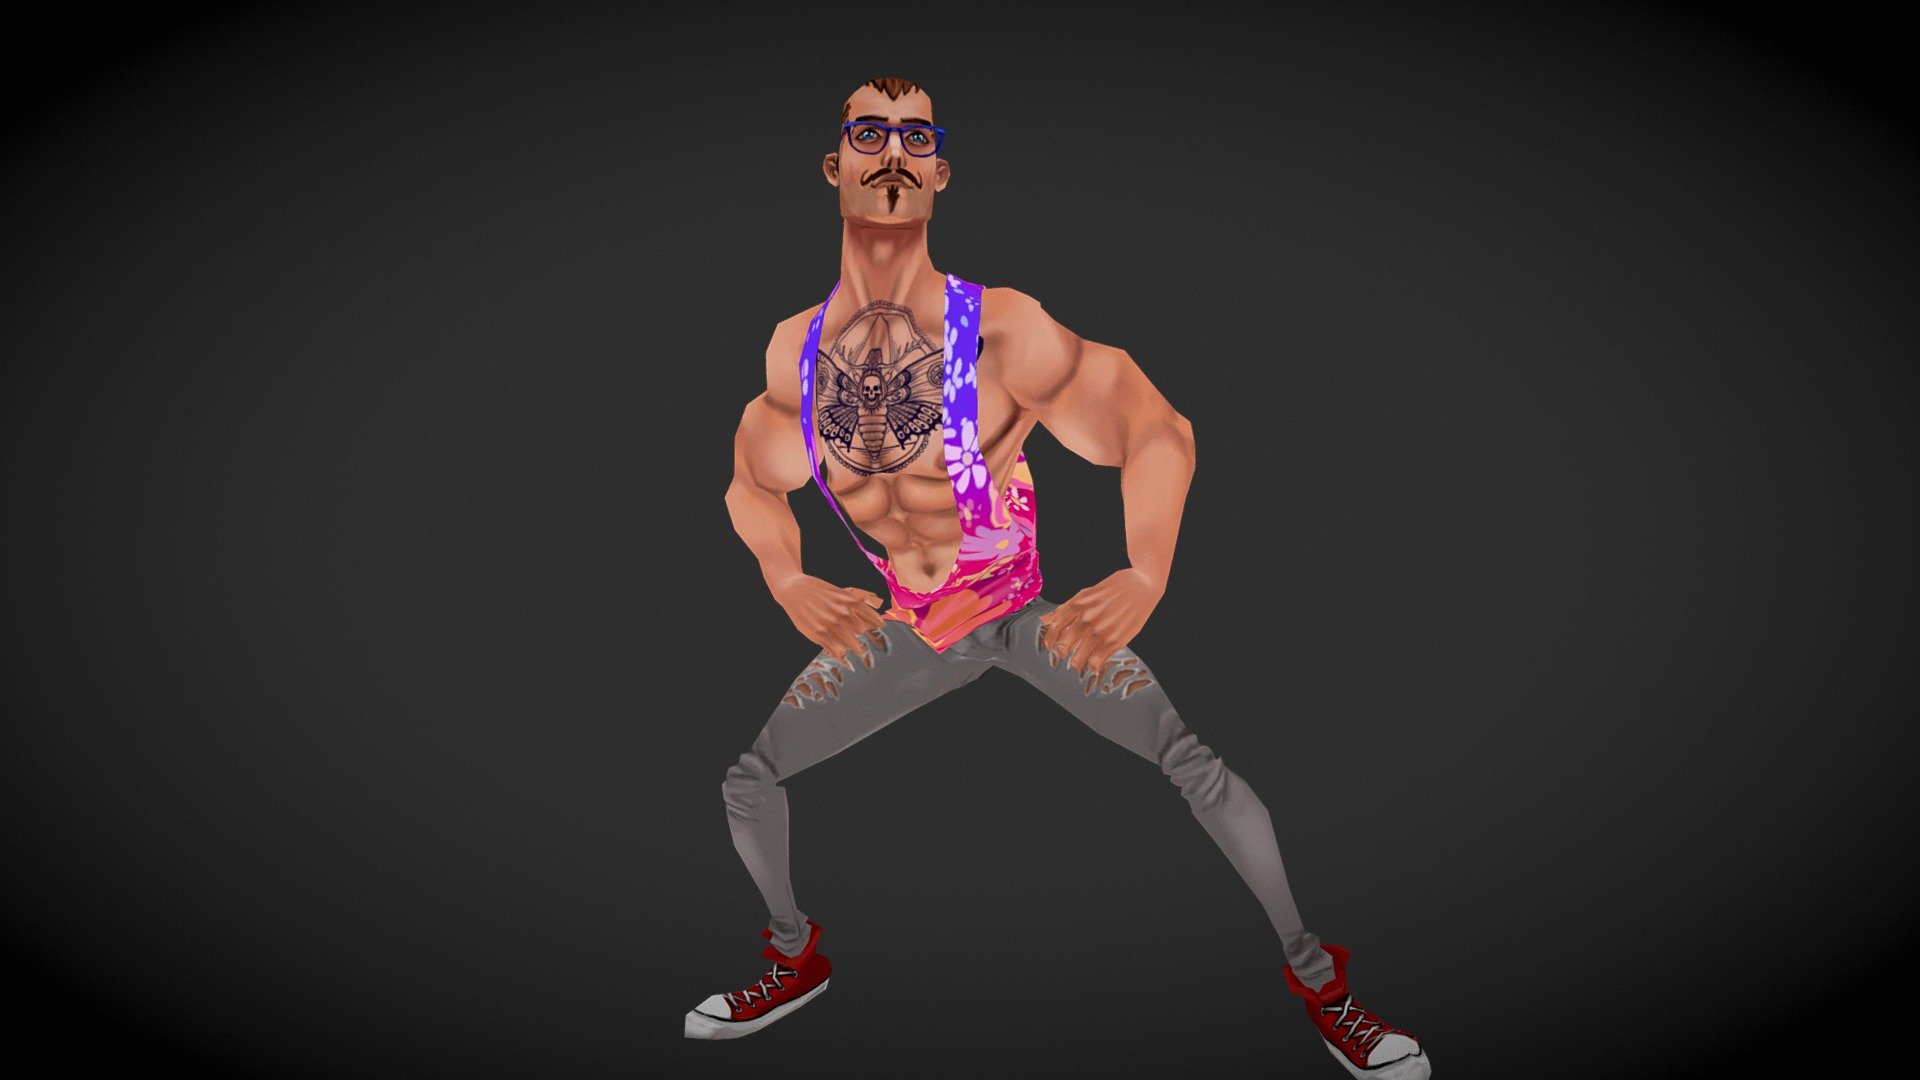 a low poly hipster character, i wanted to test the mesh with an animation and i thought dancing would be a fairly good way to check the model for defects. 

also i thought it would be funny.

autorigged and animated in mixamo - Hipster Dance - 3D model by terrordactil 3d model